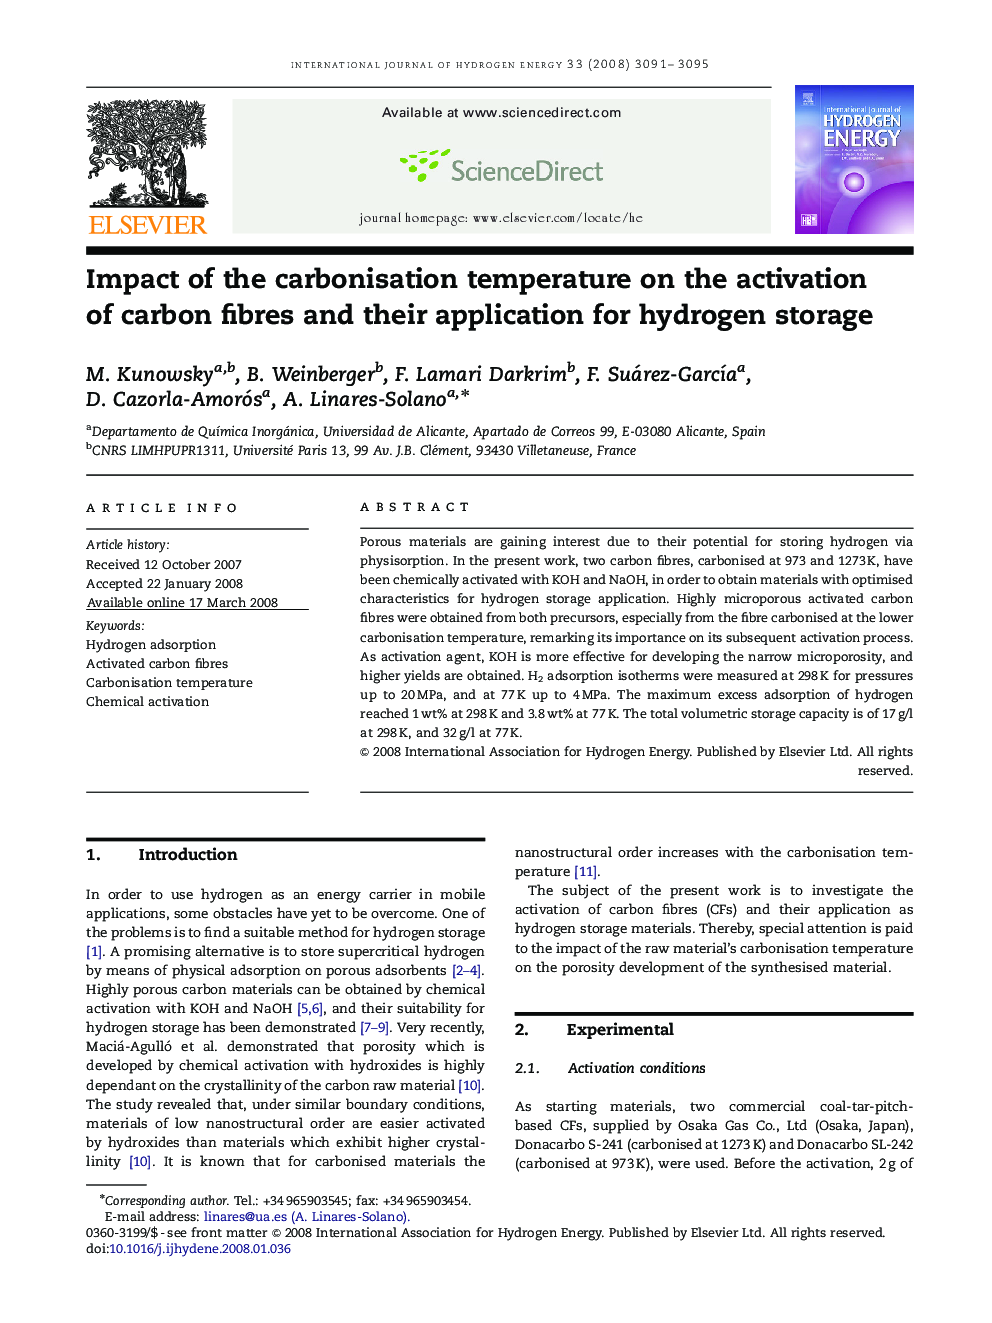 Impact of the carbonisation temperature on the activation of carbon fibres and their application for hydrogen storage